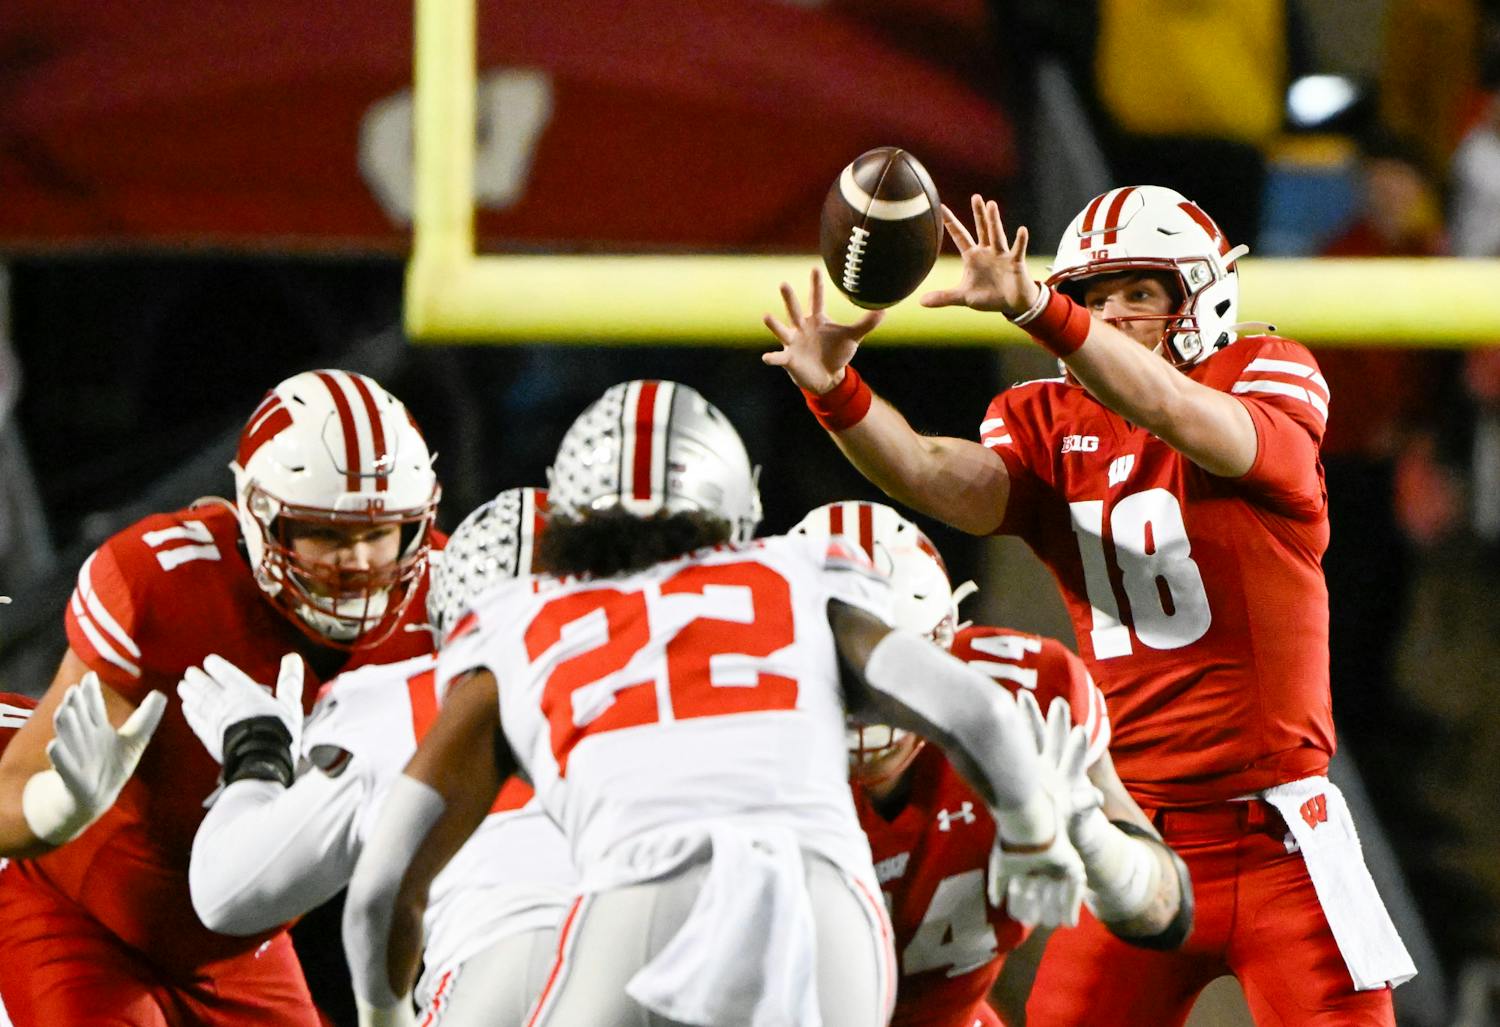 PHOTOS: Ohio State spooked Wisconsin, leading to a 24-10 loss 